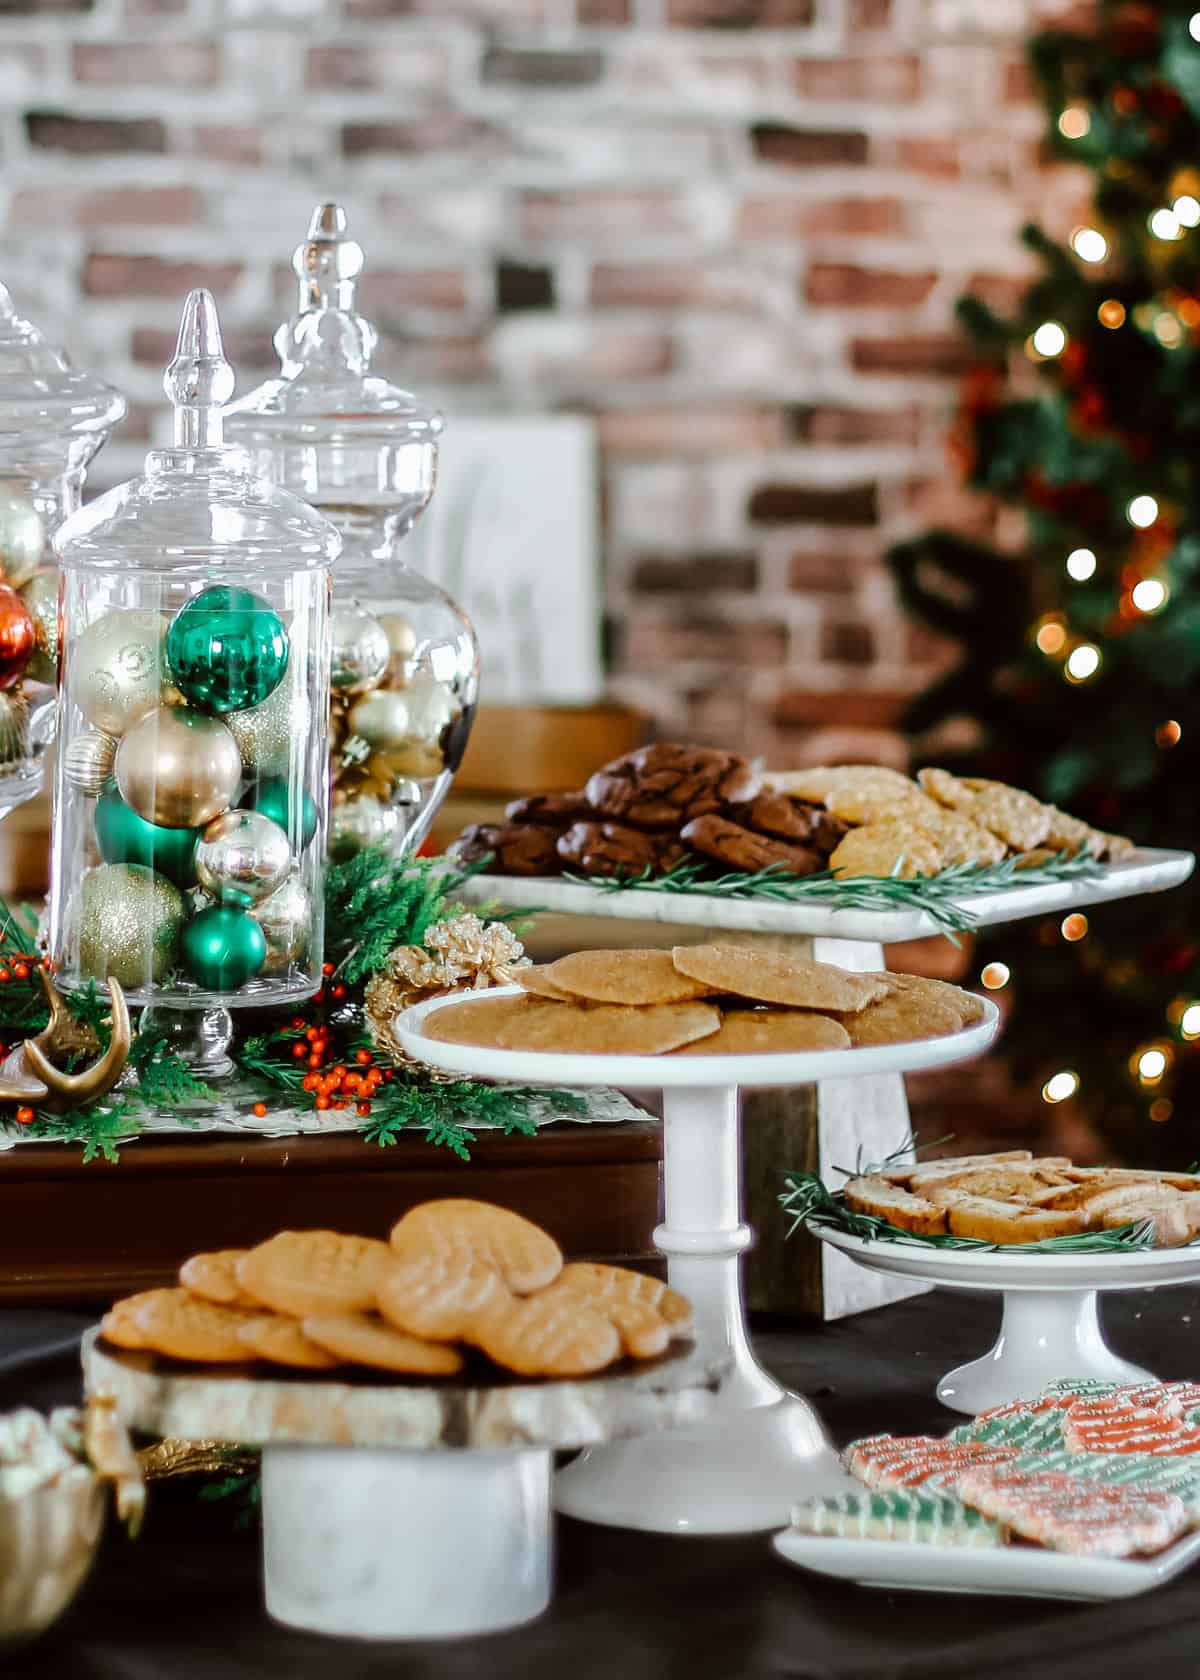 Christmas table with pedestals and trays of cookies.